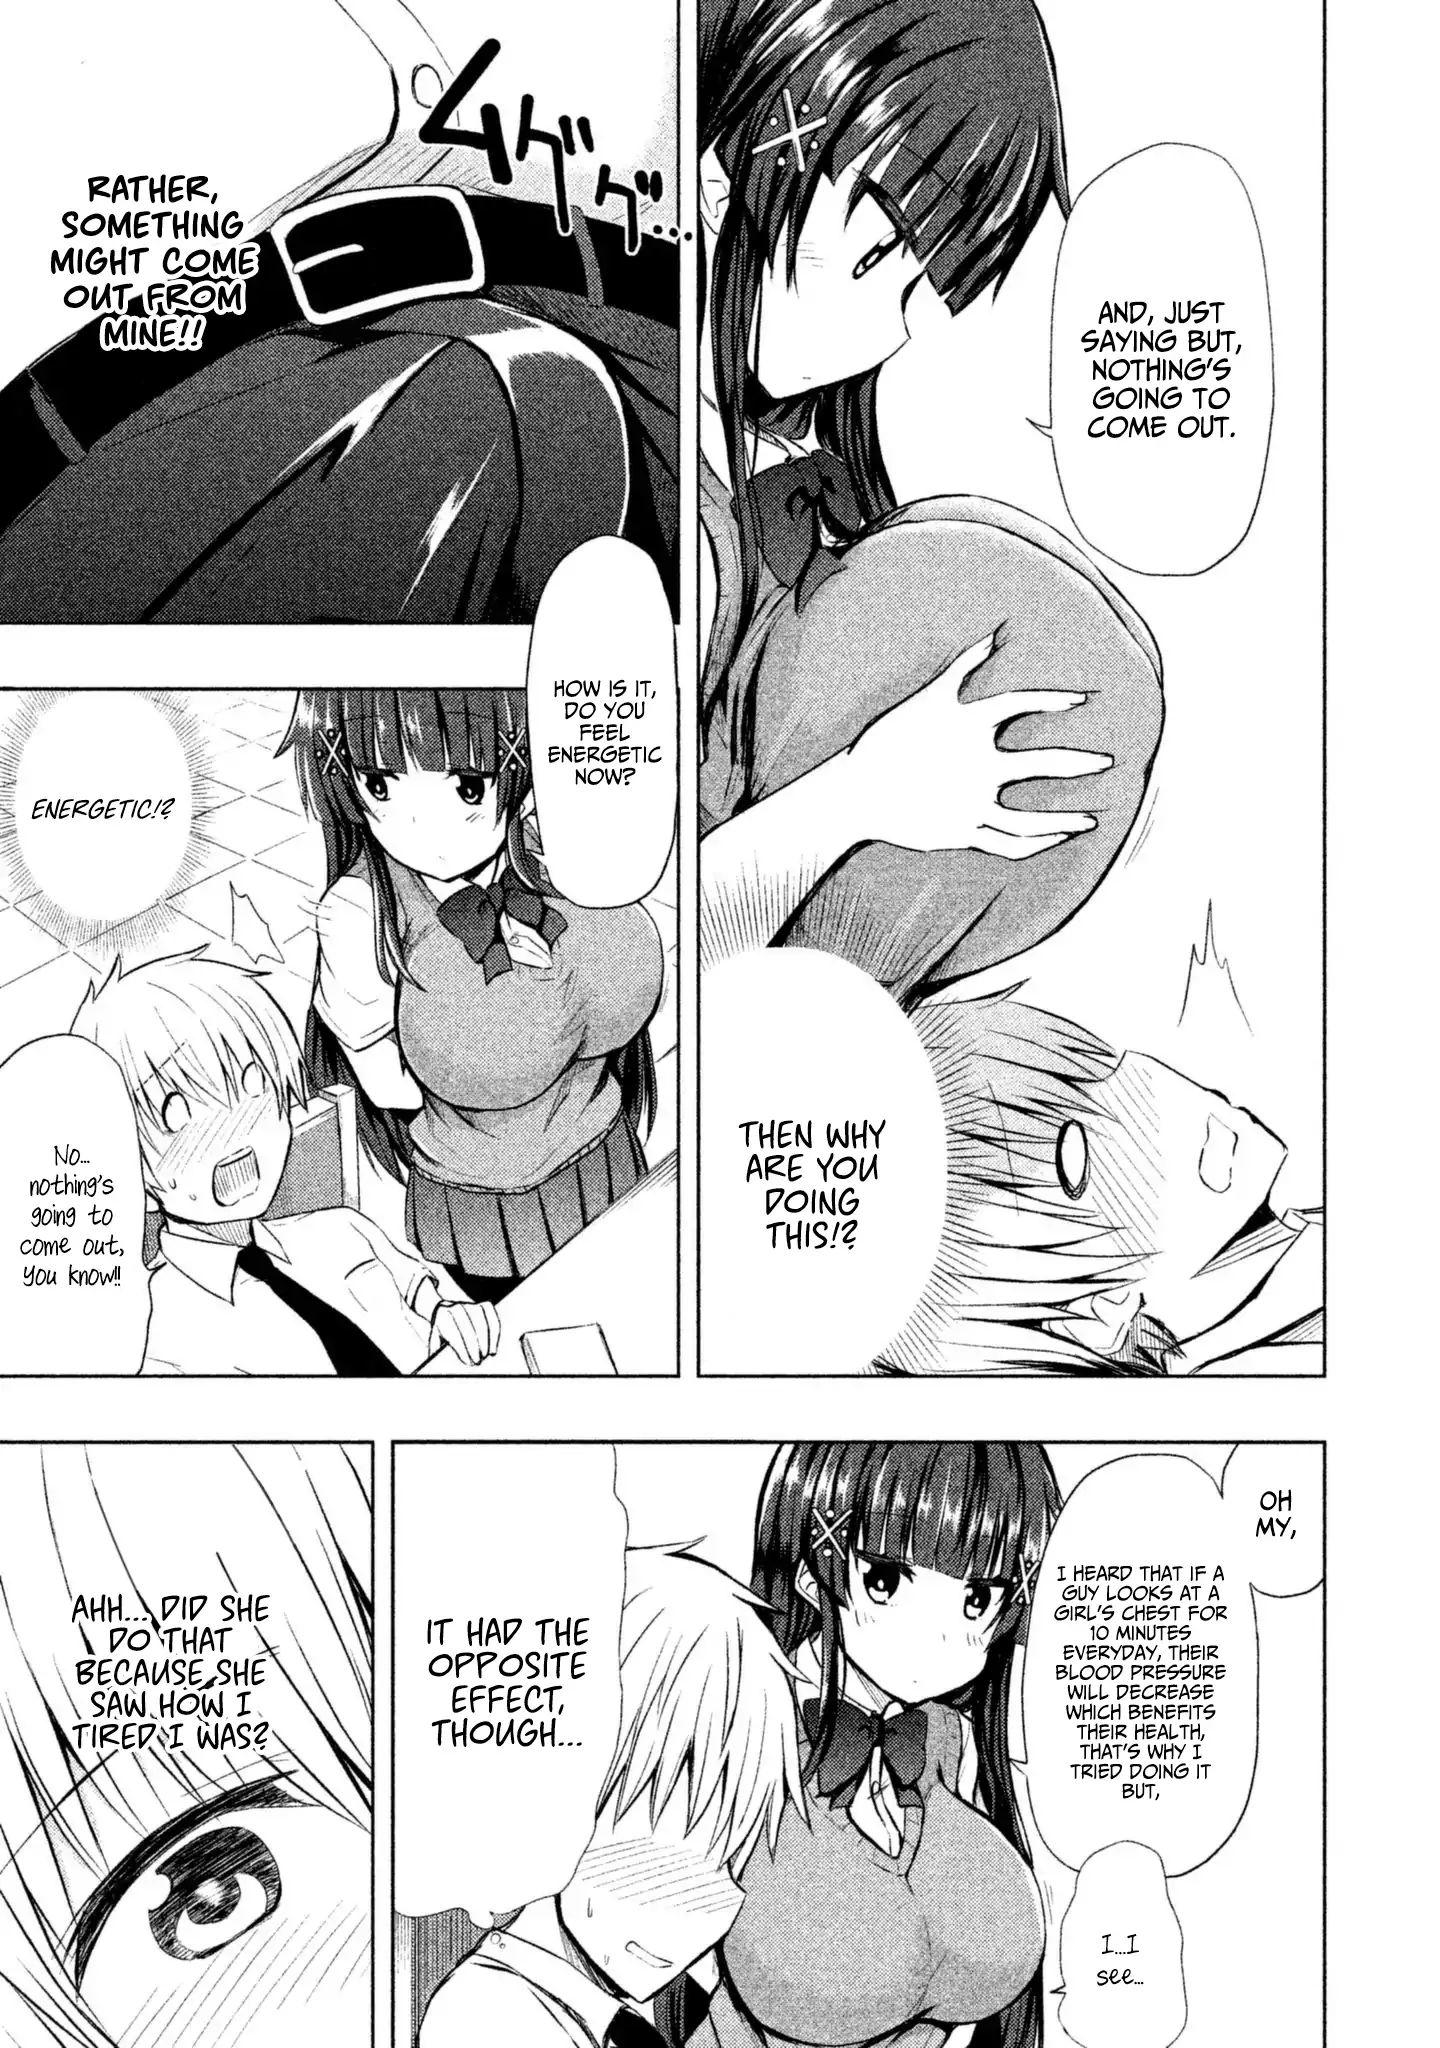 A Girl Who Is Very Well-Informed About Weird Knowledge, Takayukashiki Souko-San Vol.1 Chapter 1: Chest page 10 - Mangakakalots.com